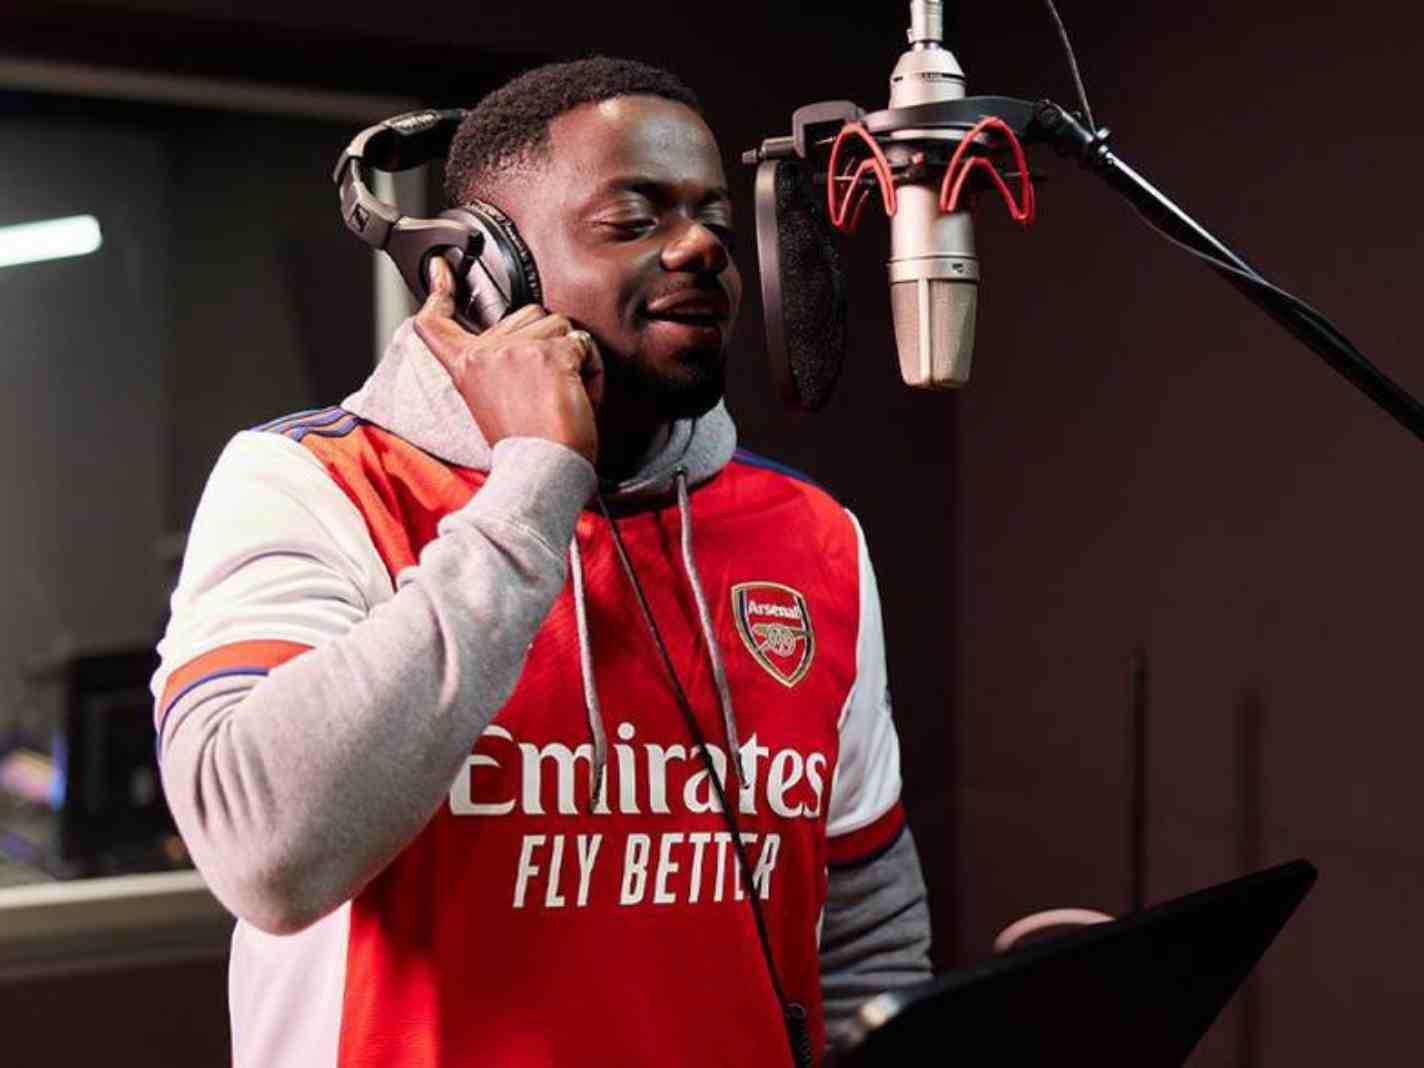 The photo shows Daniel Kaluuya working in the studios for new Arsenal All or Nothing series.